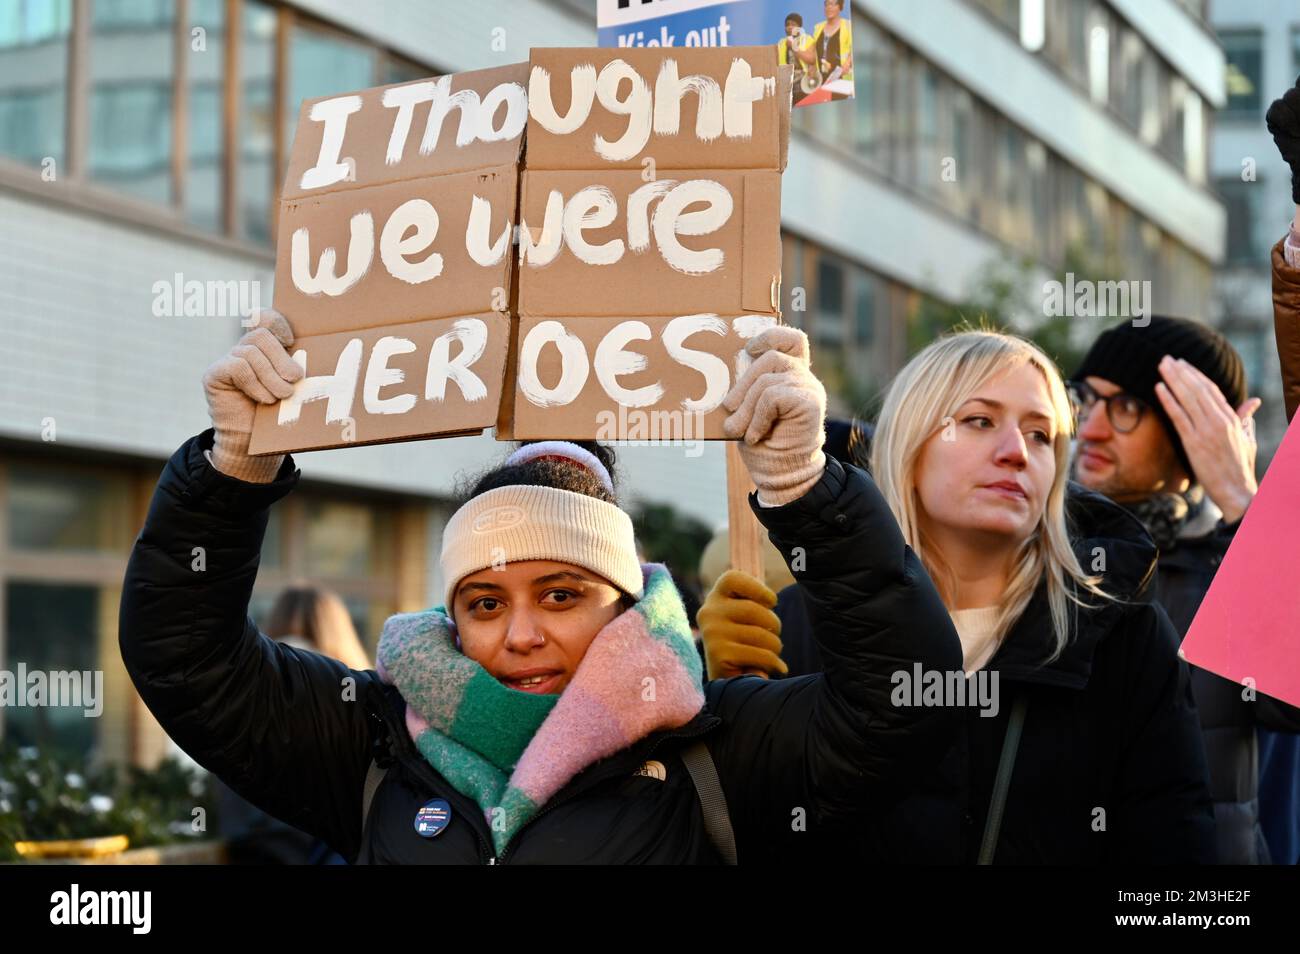 London, UK. Nurses staged the largest nurses' strike in NHS history in England, Wales and Northern Ireland, despite warnings of disruption and appointment delays for patients. Credit: michael melia/Alamy Live News Stock Photo